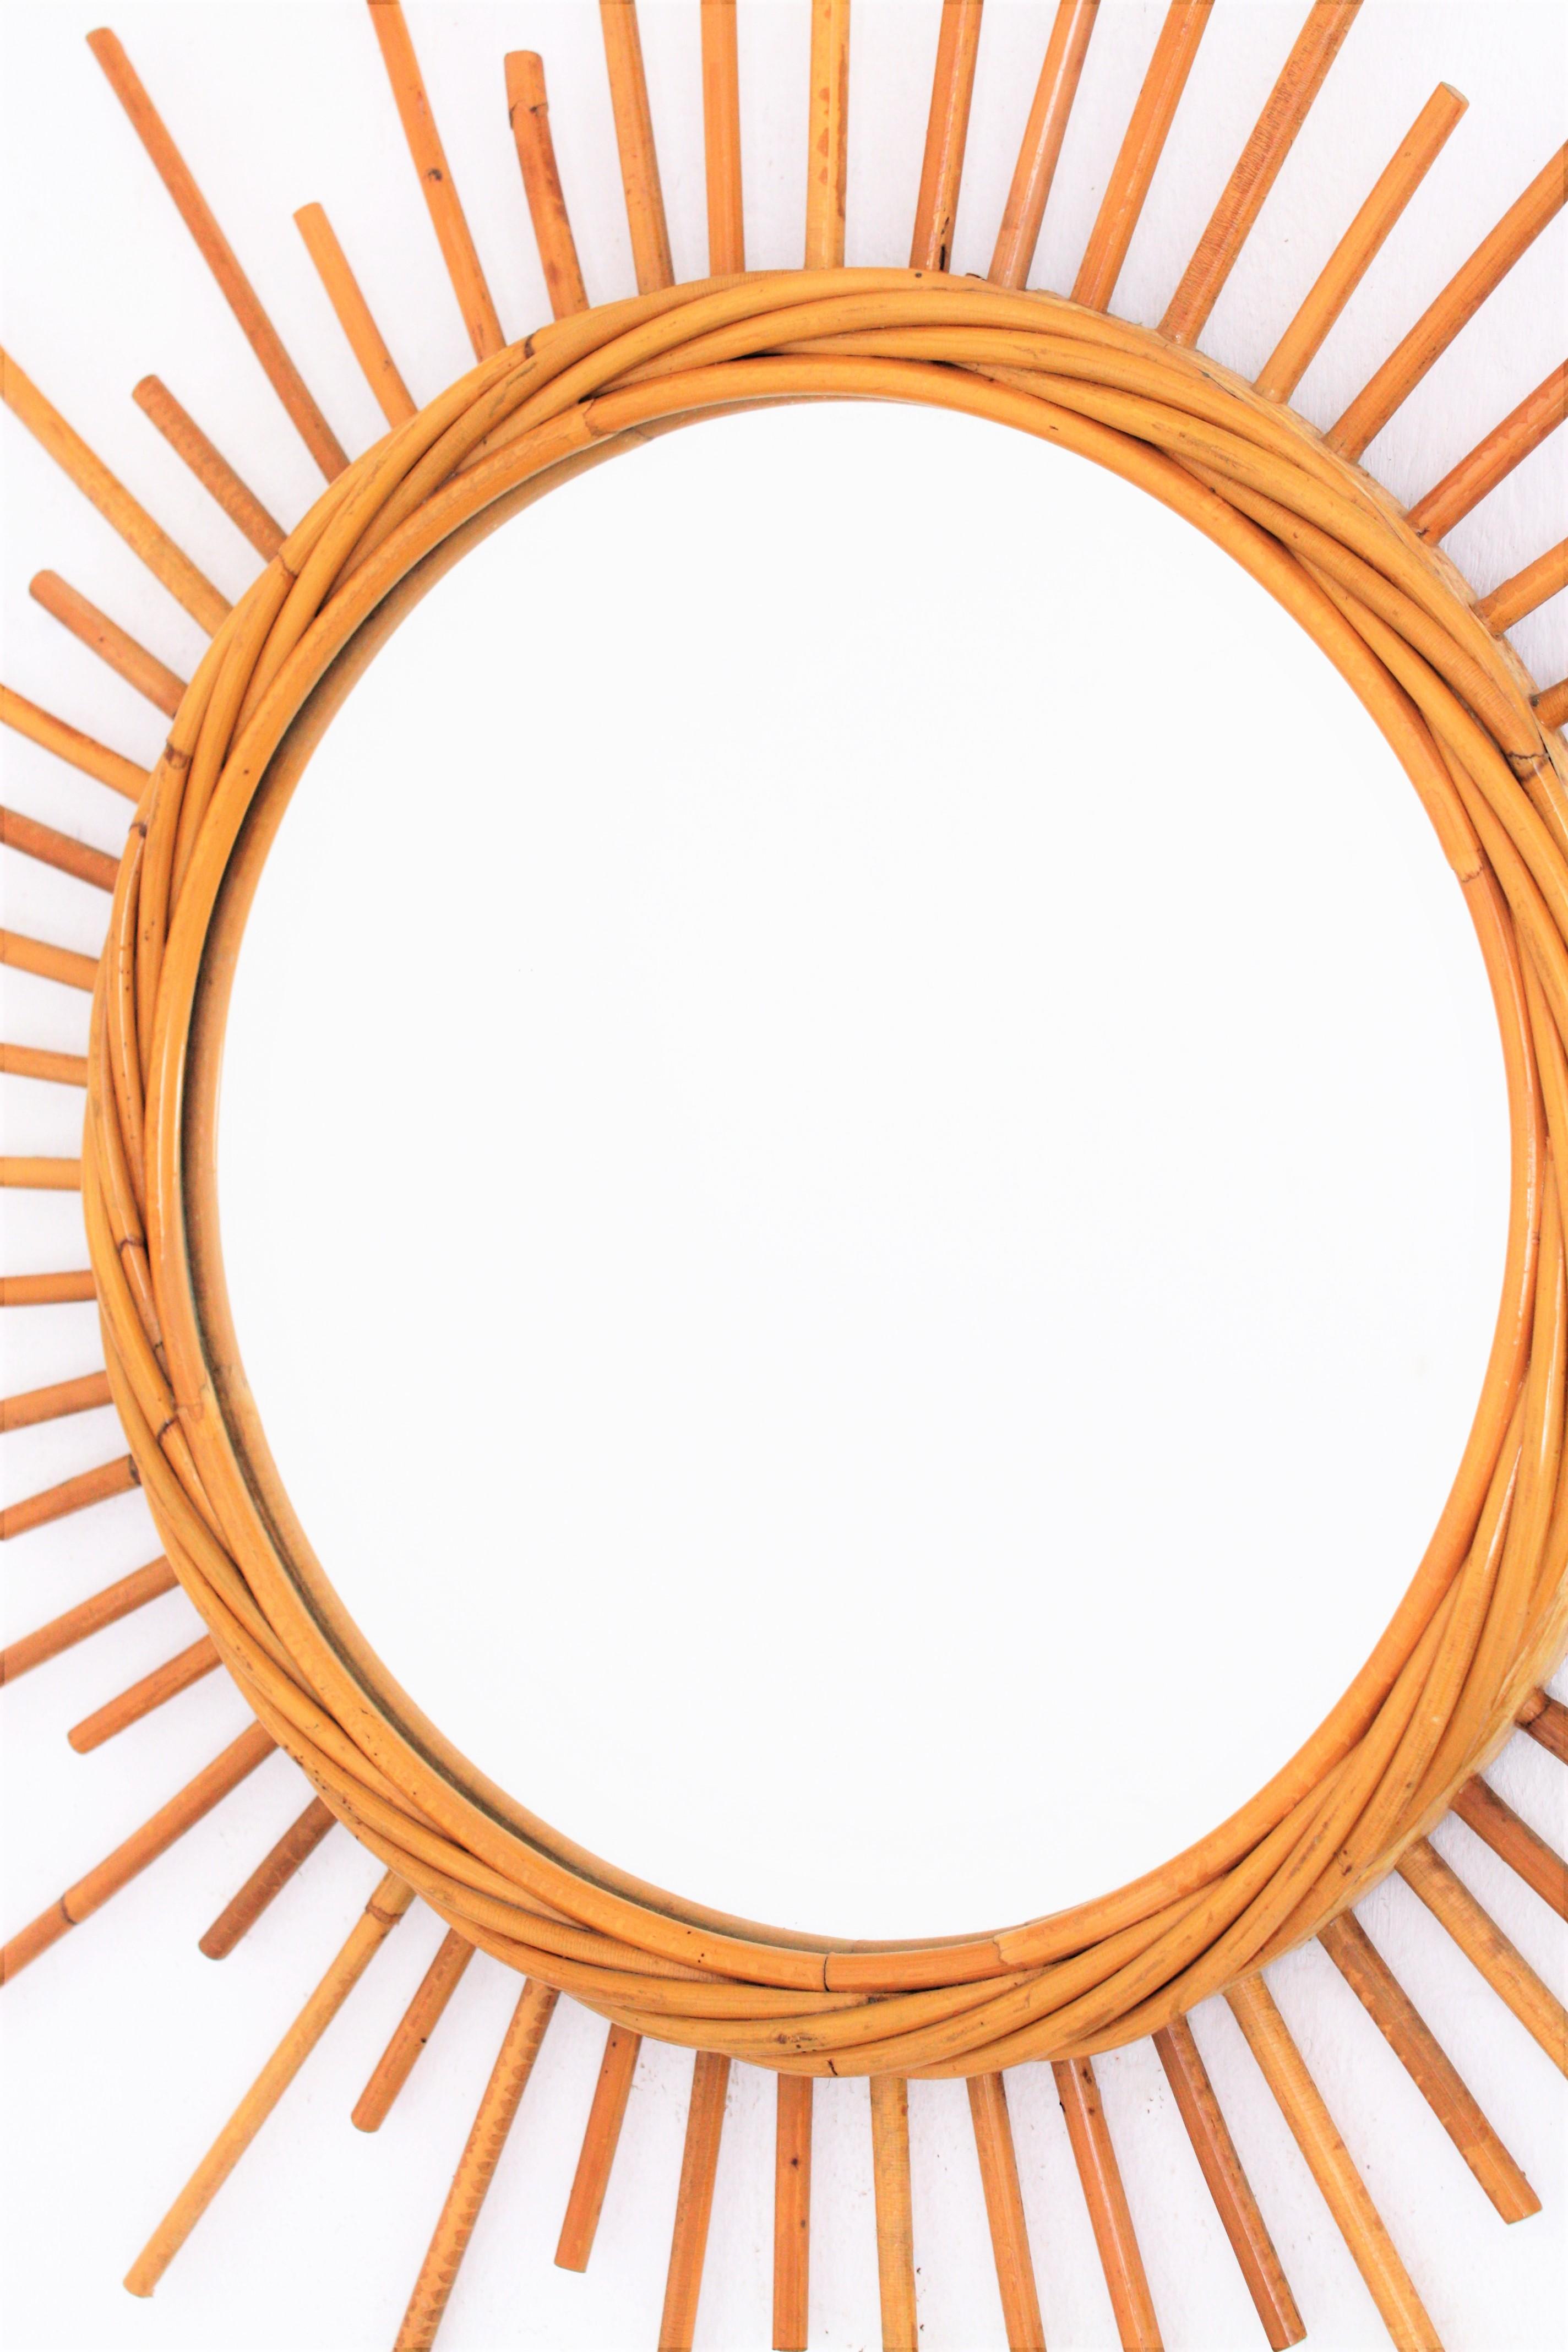 Rattan Sunburst Mirror from the French Riviera, 1960s For Sale 5